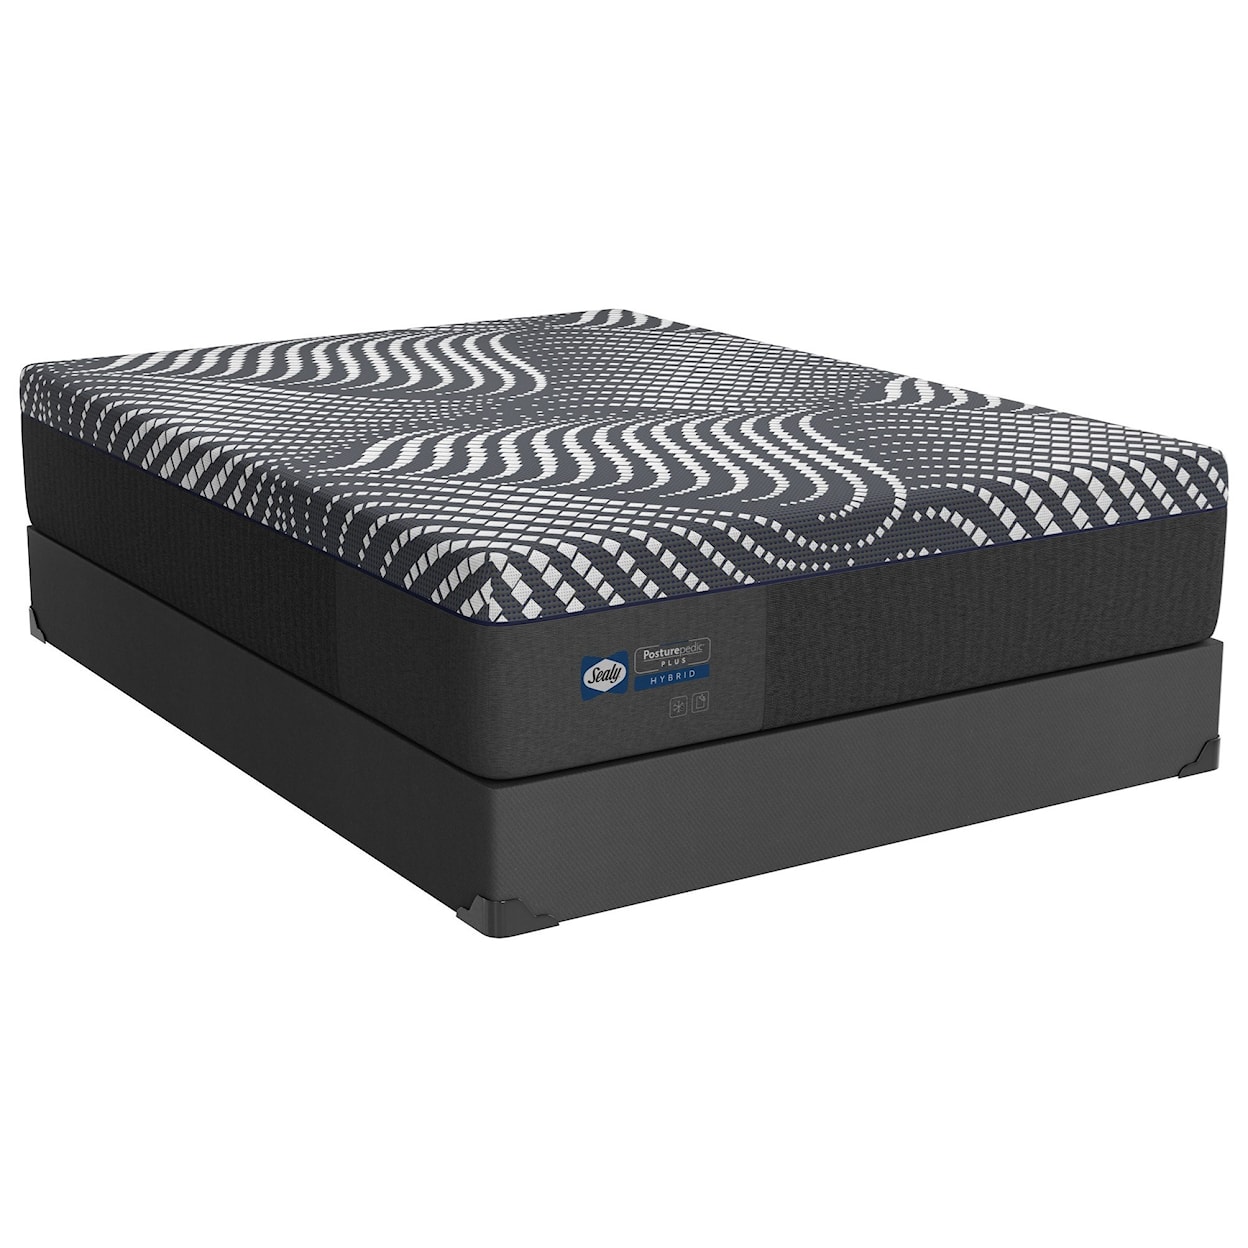 Sealy High Point Hybrid Soft Twin XL Soft Mattress and 9" Foundation